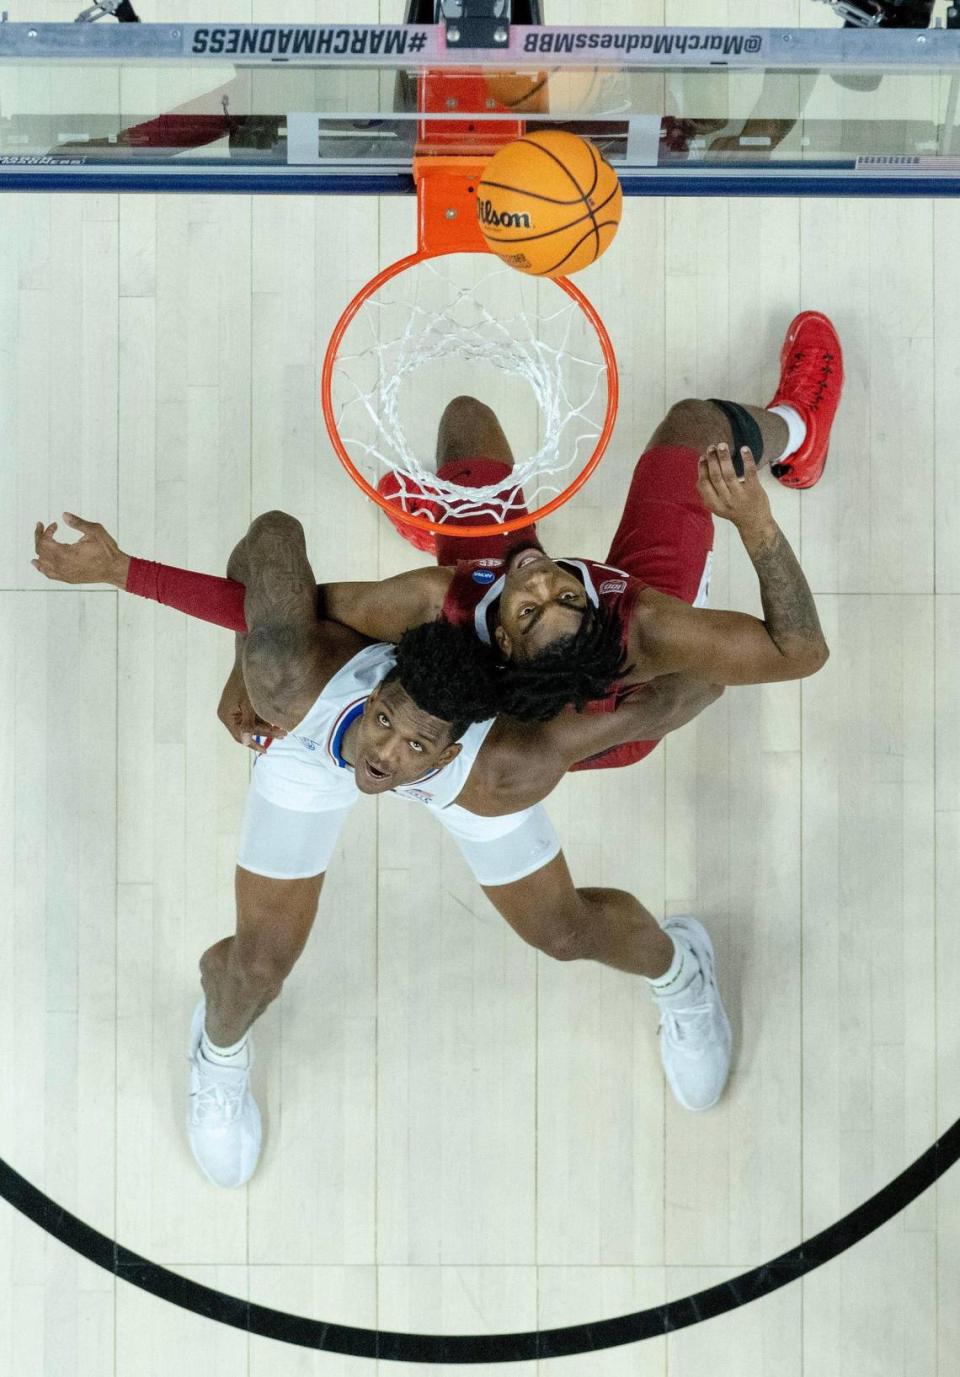 Kansas forward K.J. Adams Jr. (24) battles for a rebound with Arkansas forward Kamani Johnson (20) during a second-round college basketball game in the NCAA Tournament Saturday, March 18, 2023, in Des Moines, Iowa.